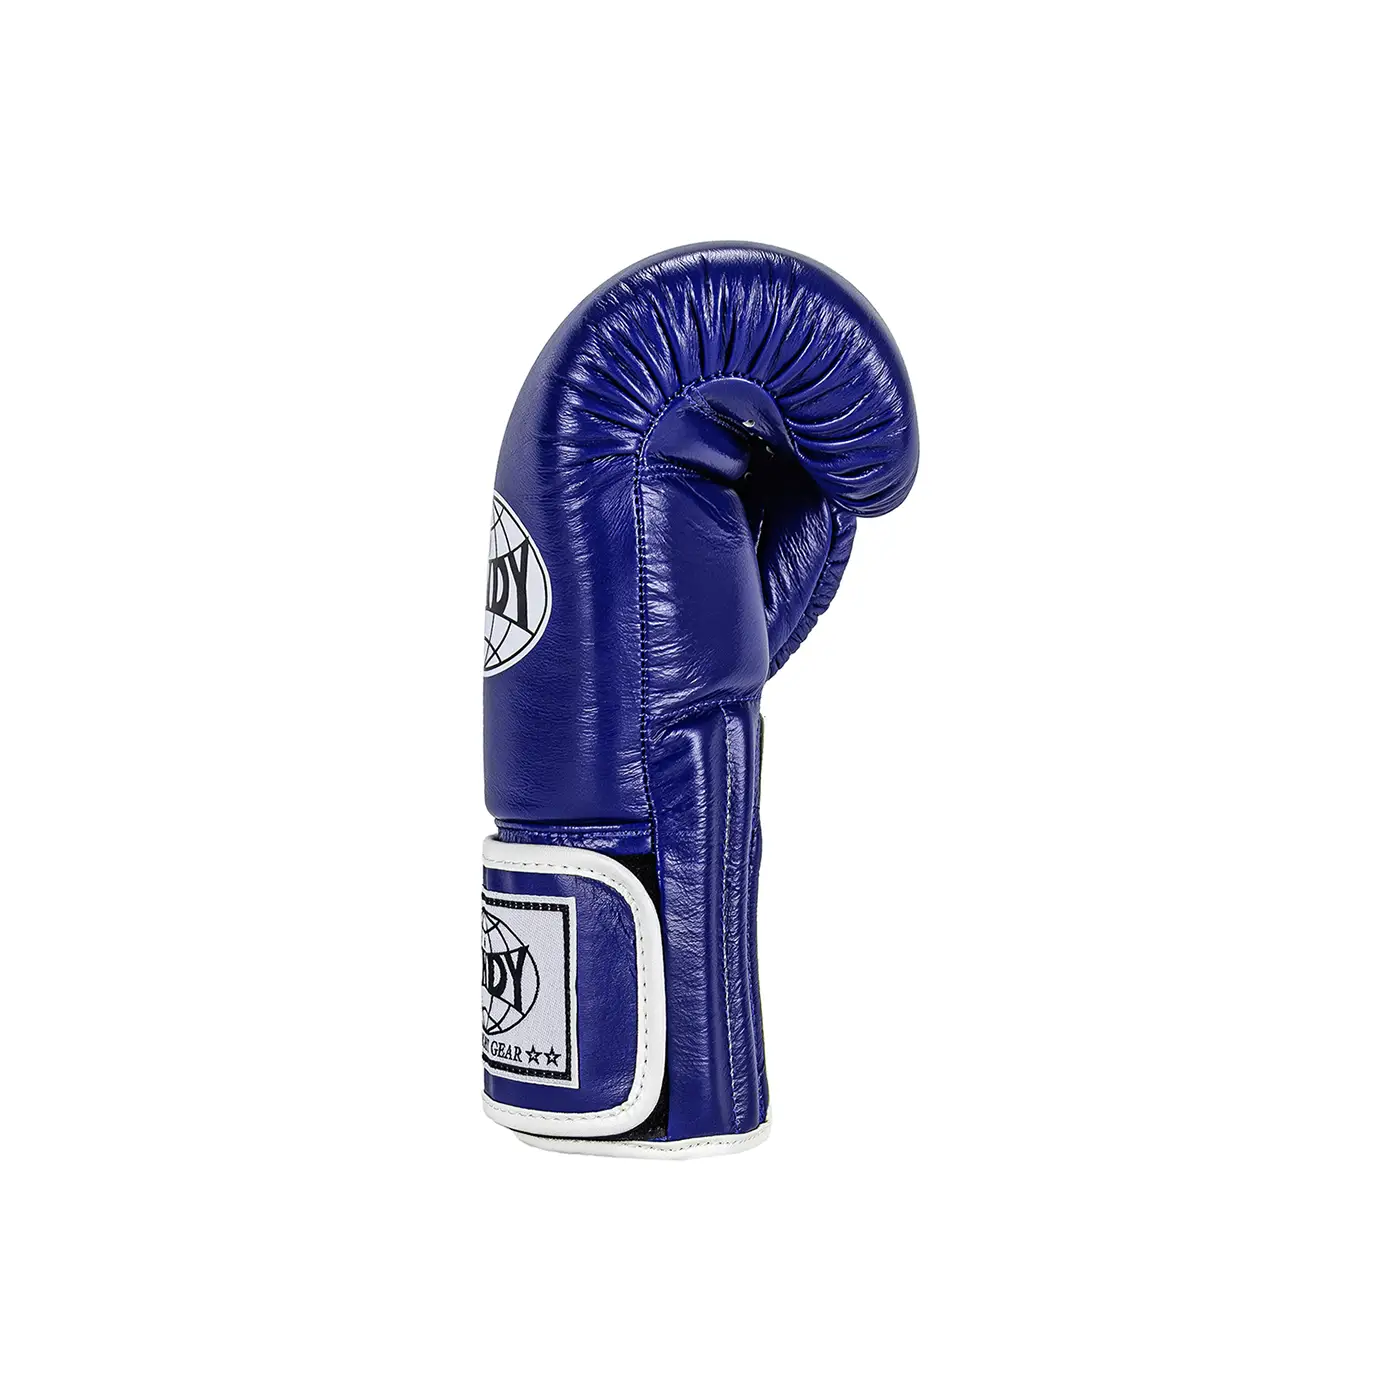 Windy Muay Thai Gloves Blue right side view